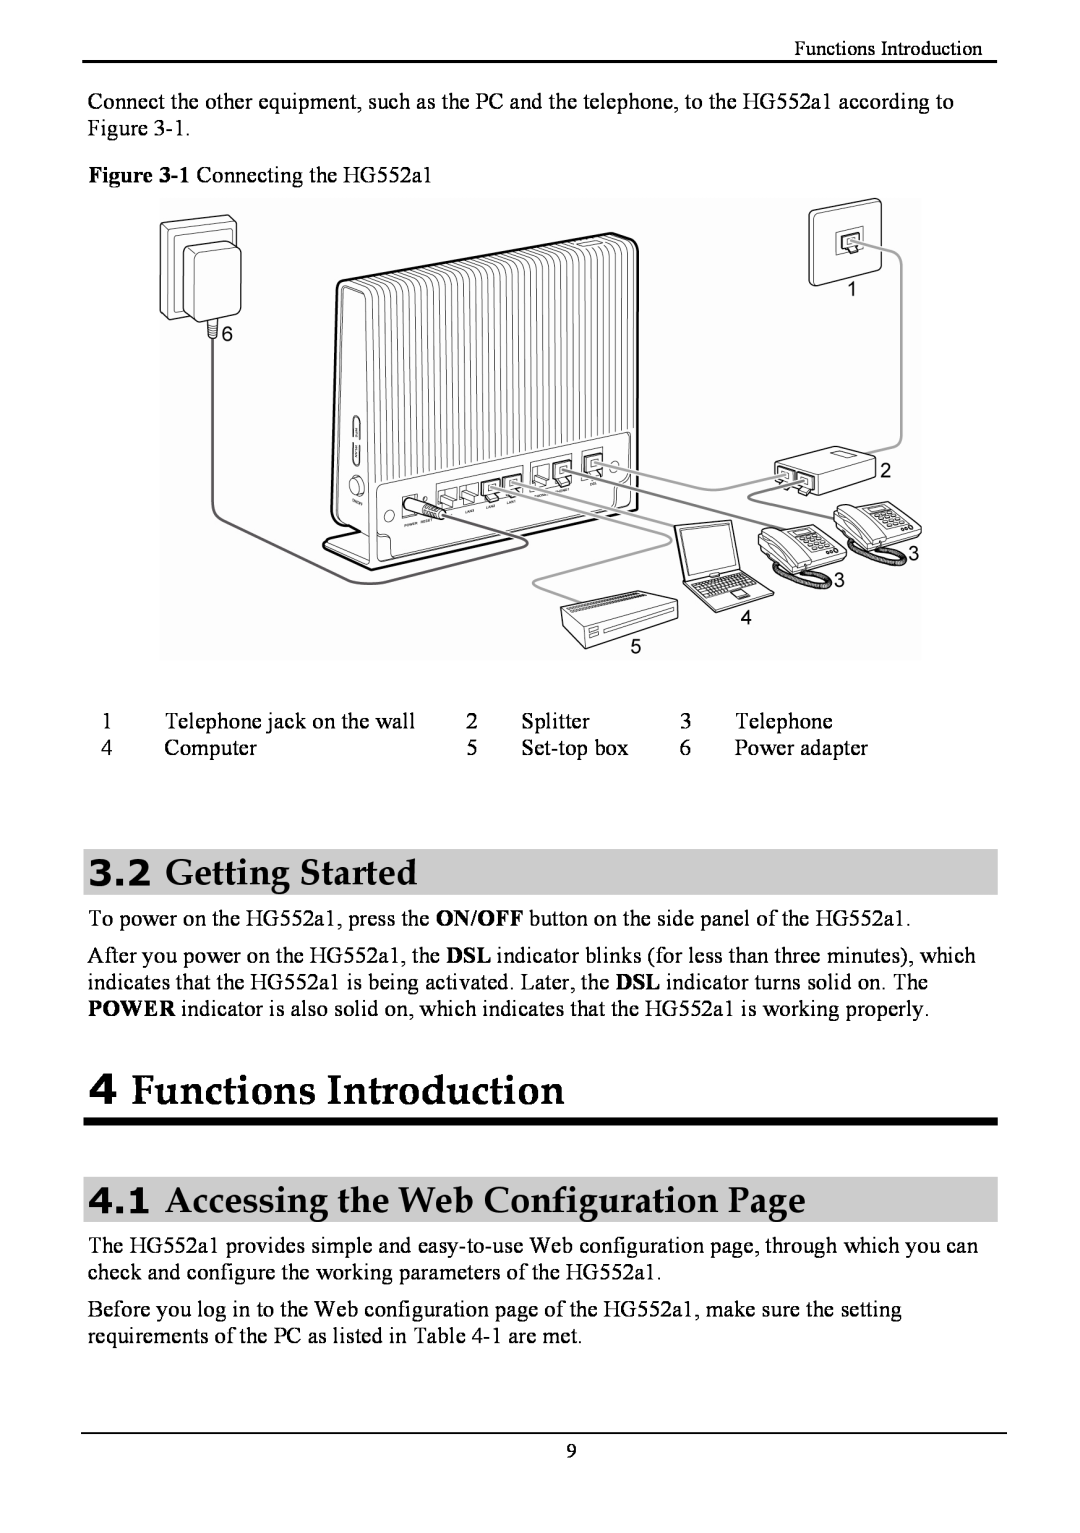 Huawei HG552a1 manual Functions Introduction, Getting Started, Accessing the Web Configuration Page 